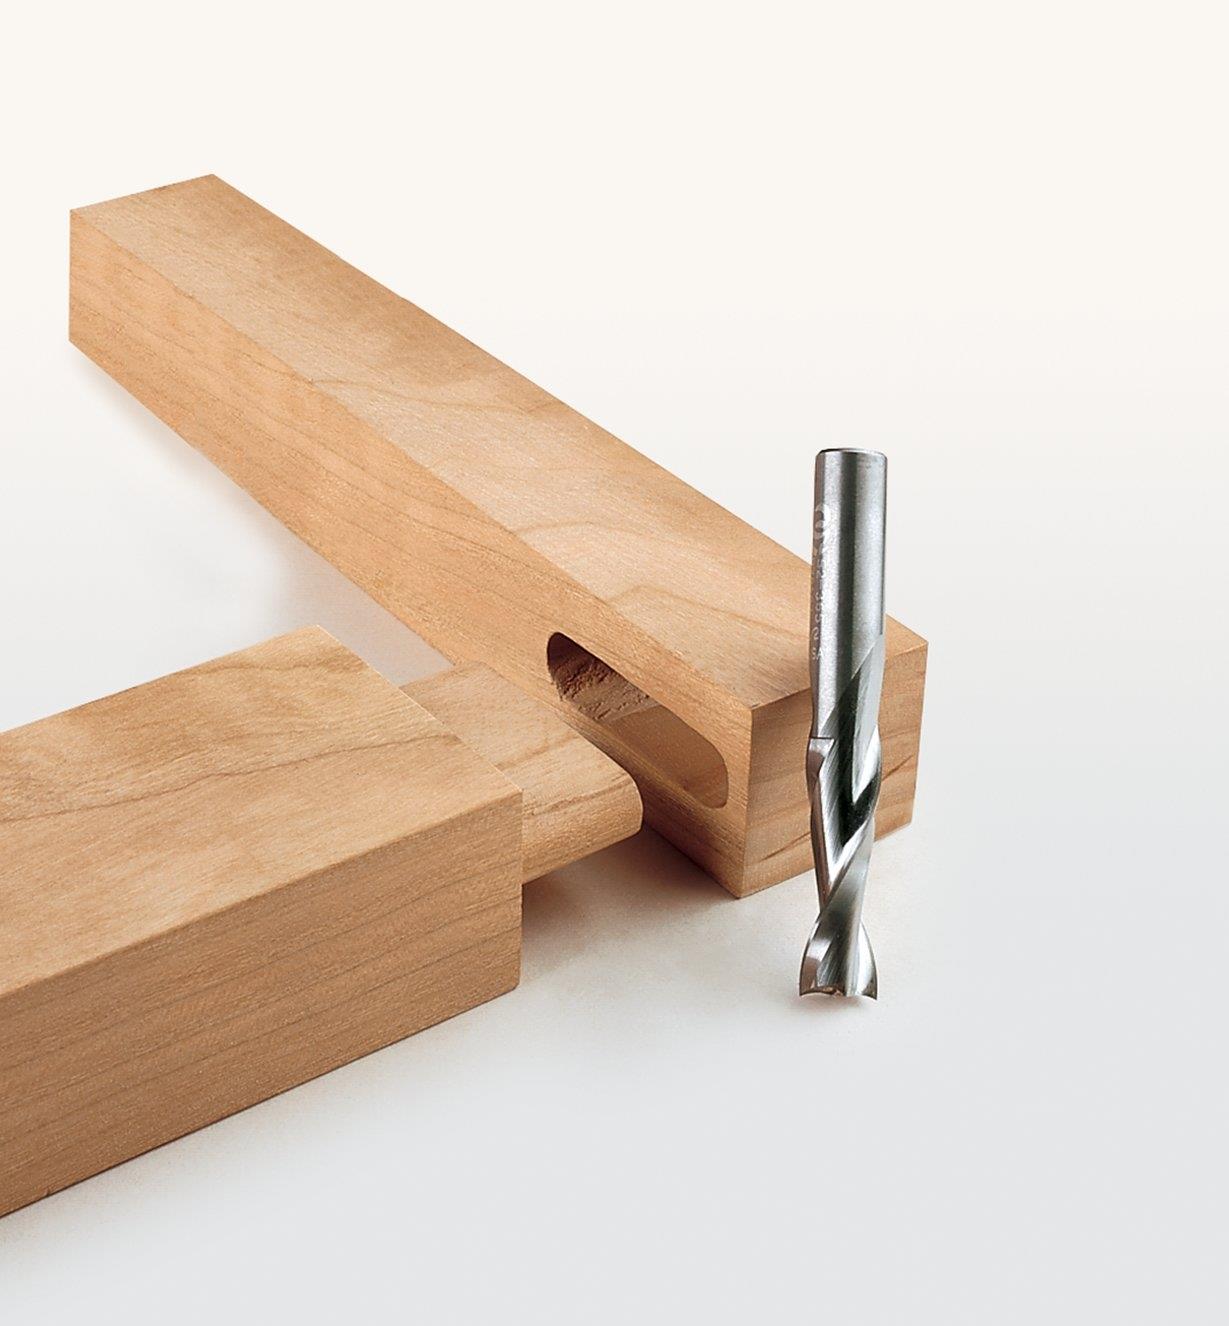 Onsrud Spiral Router Bit next to a mortise and tenon